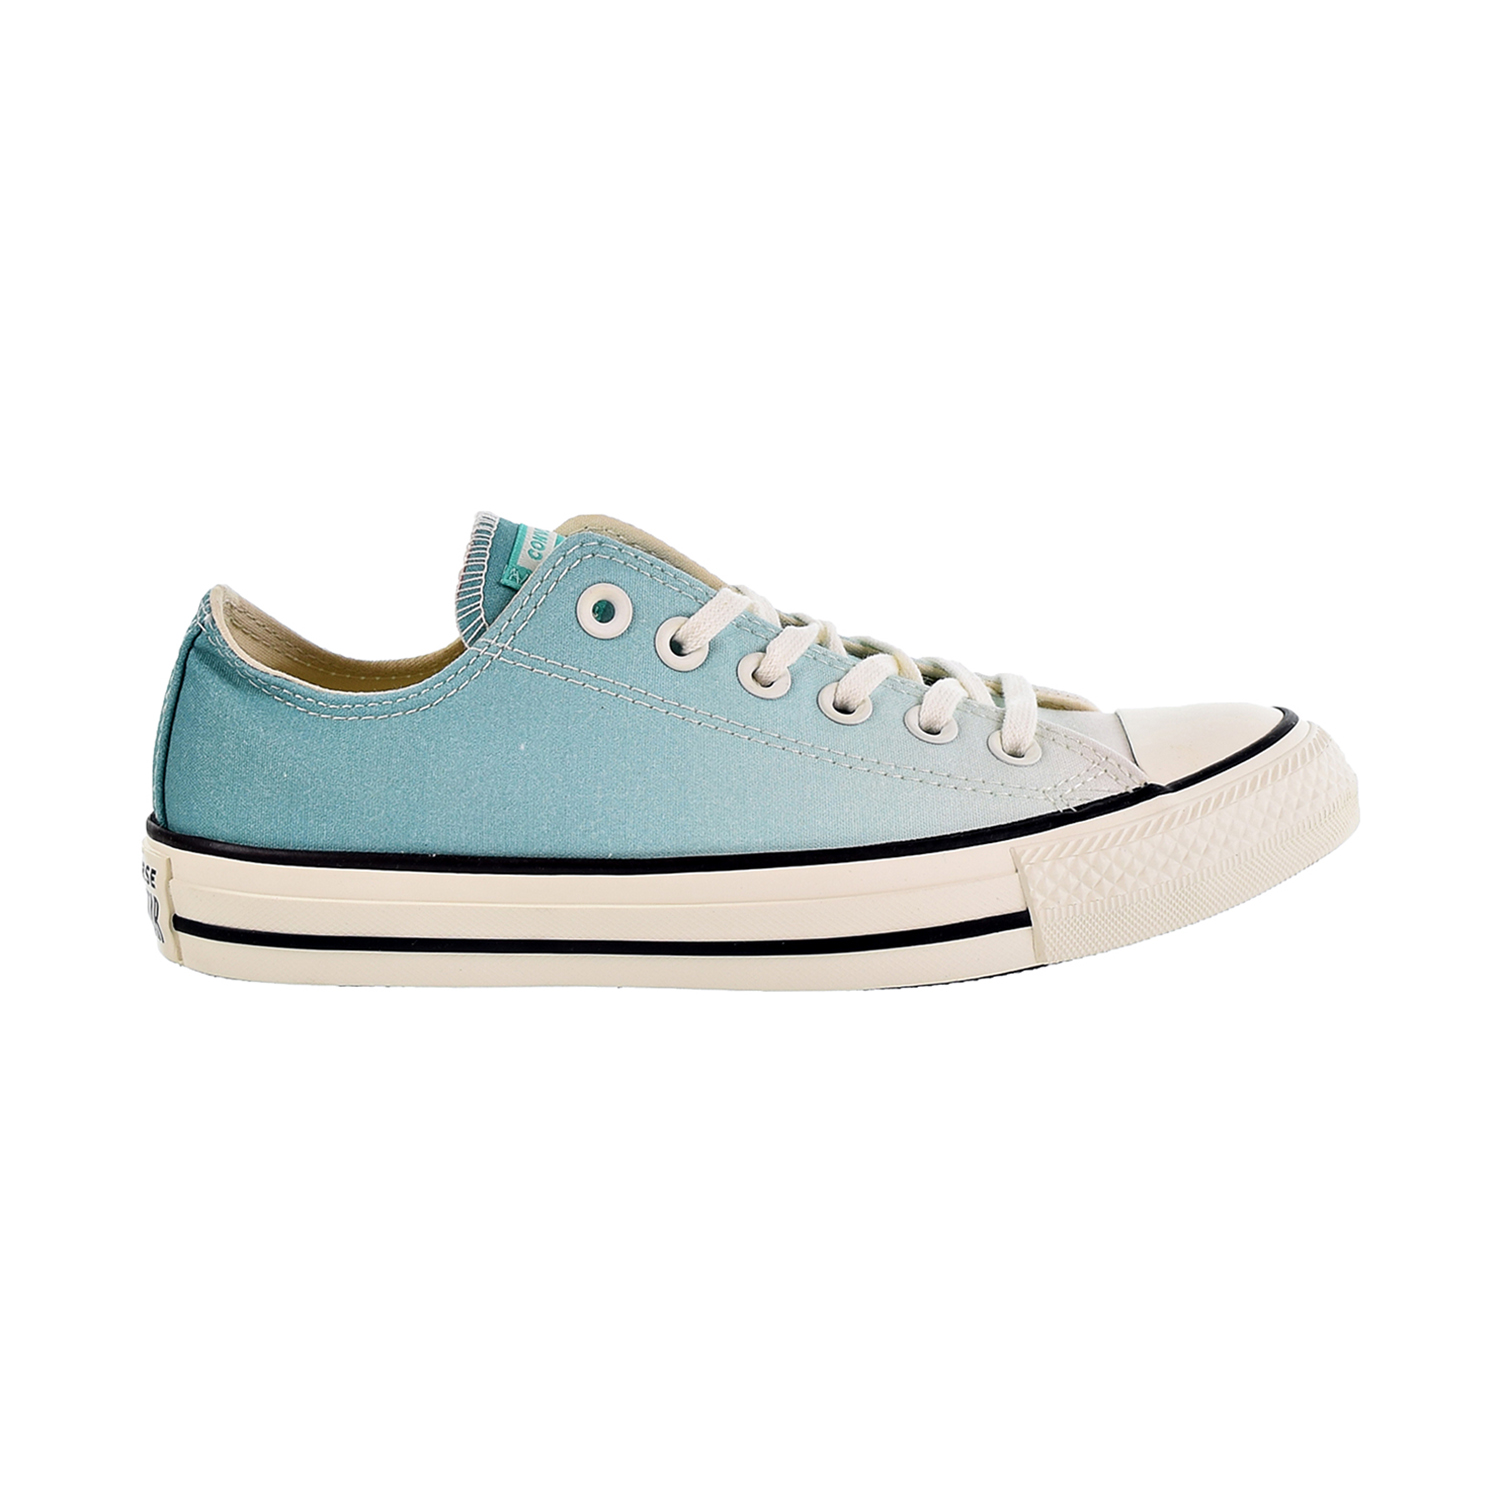 pure teal converse high tops